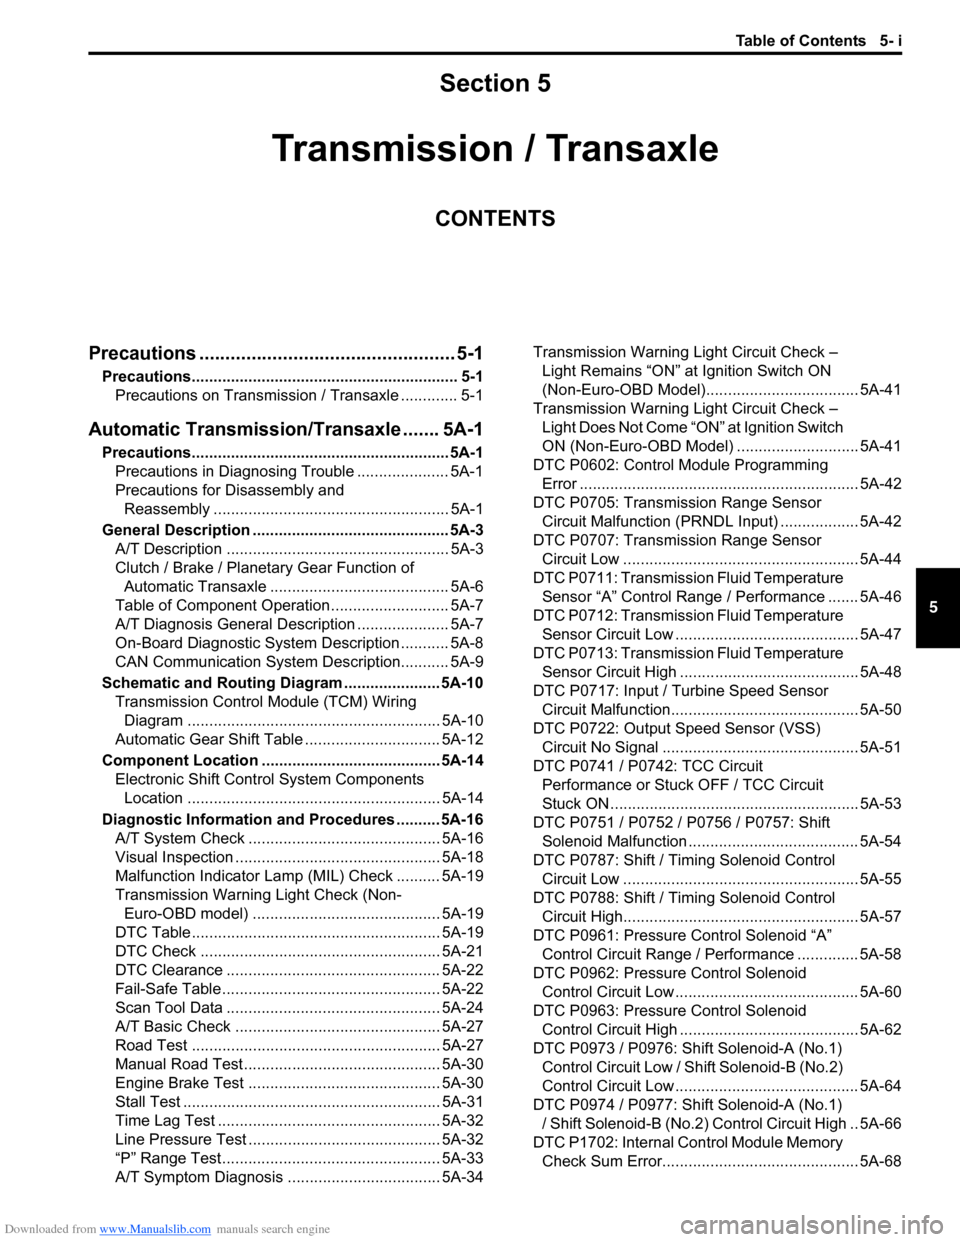 SUZUKI SX4 2006 1.G Service Workshop Manual Downloaded from www.Manualslib.com manuals search engine Table of Contents 5- i
5
Section 5
CONTENTS
Transmission / Transaxle
Precautions ................................................. 5-1
Precauti